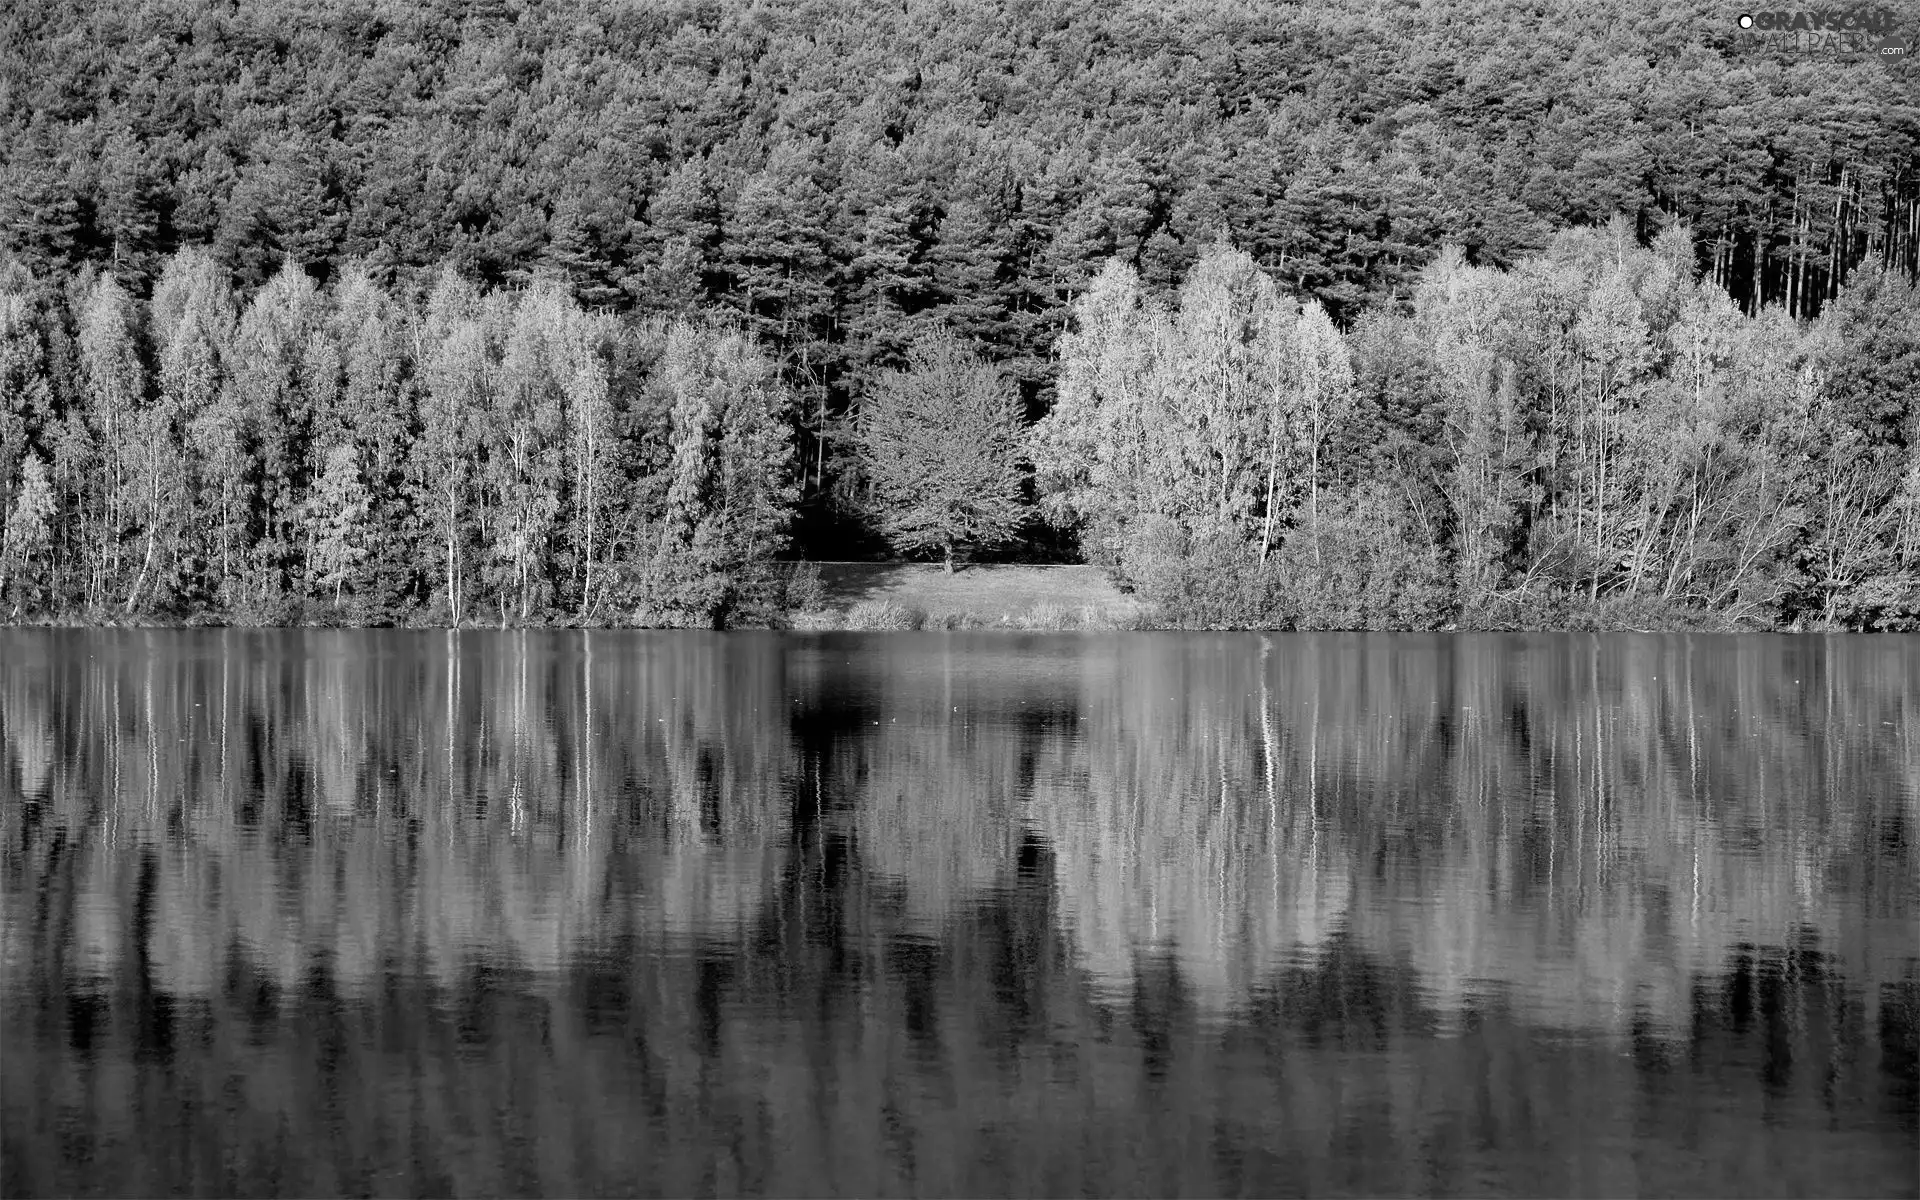 lake, reflection, trees, viewes, forest